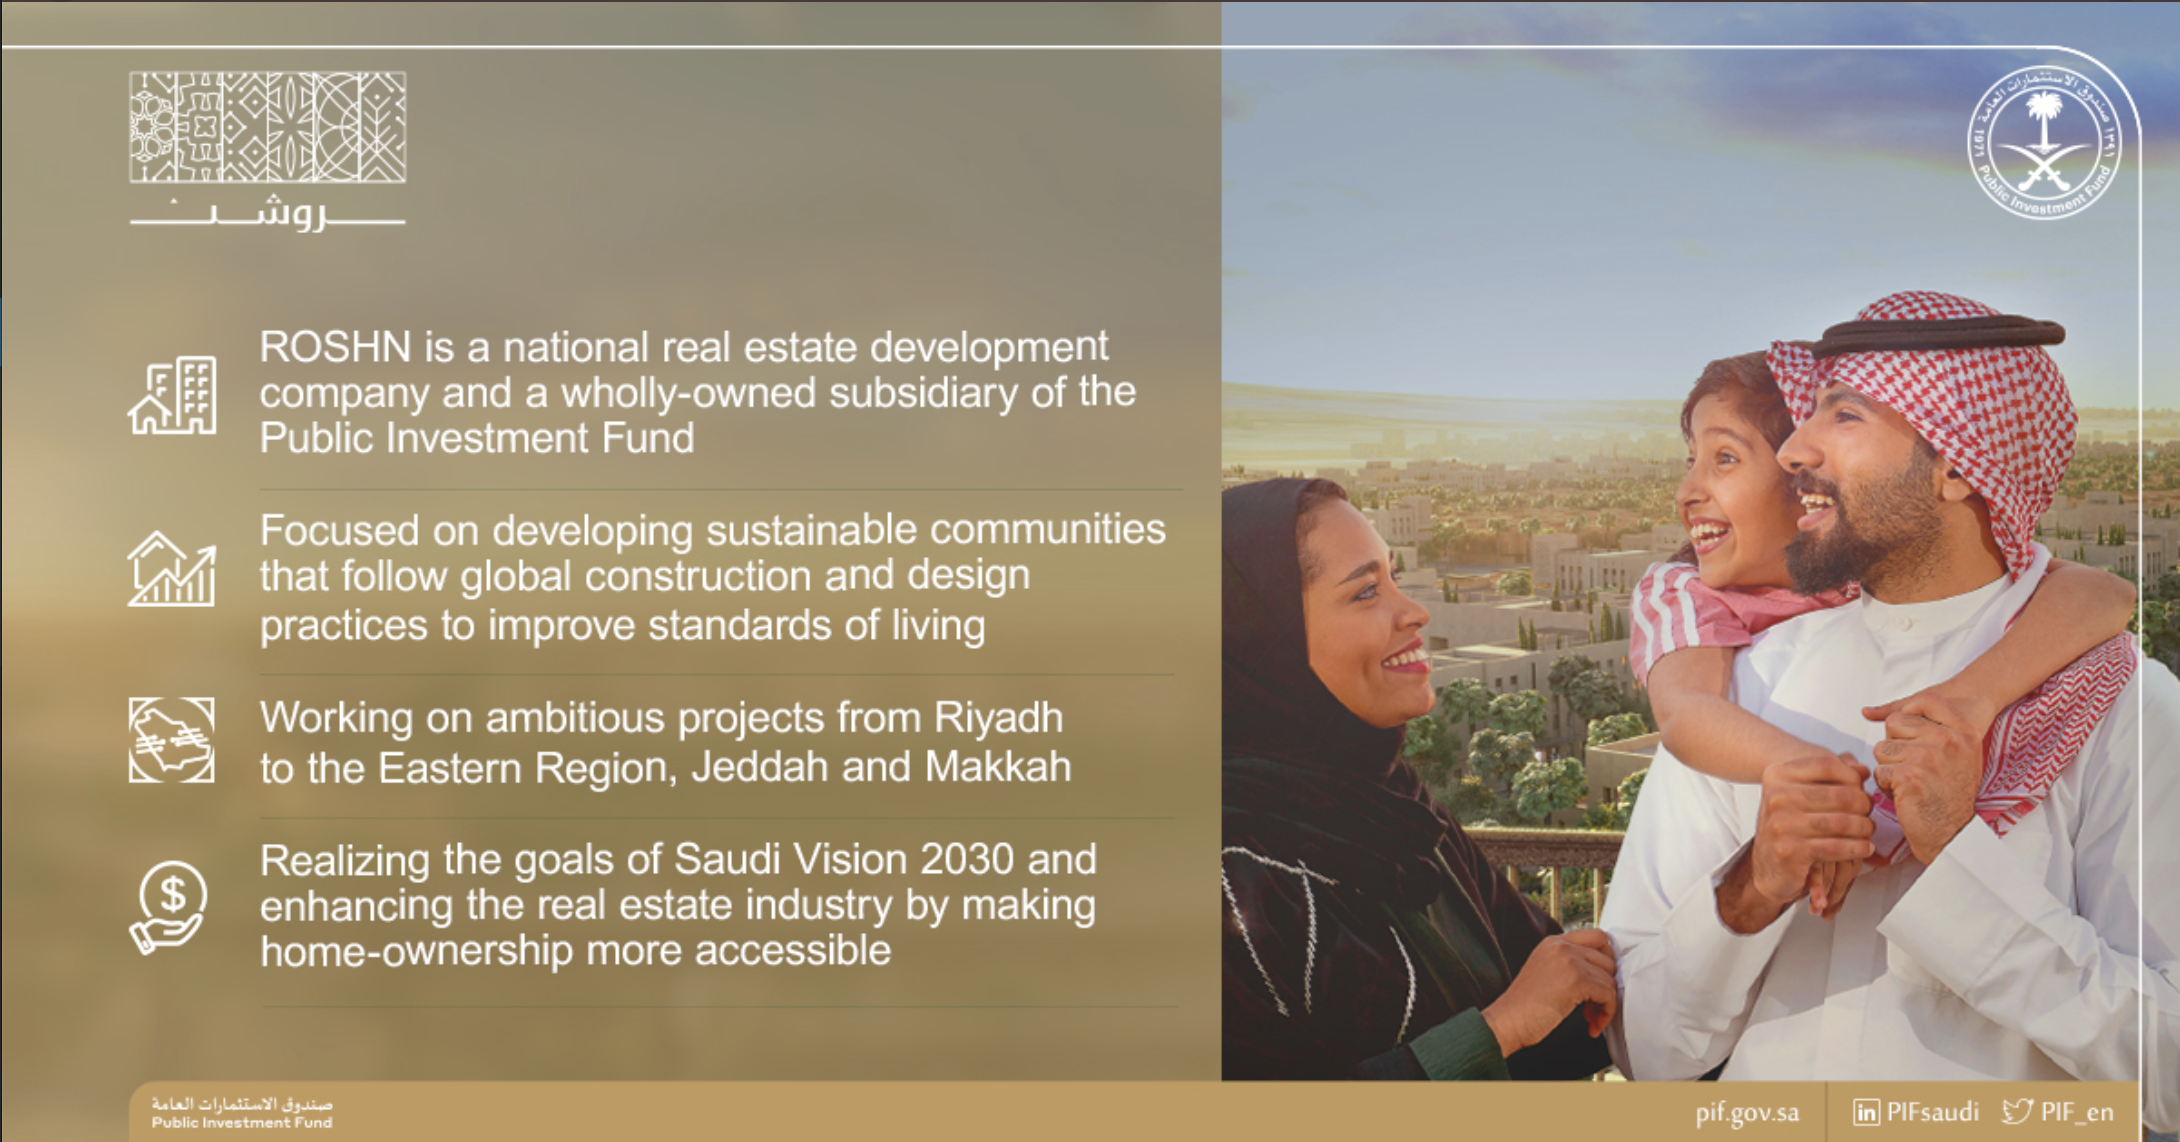 Saudi Arabia's PIF called Roshn "a national champion with a mandate to develop world-class urban communities."